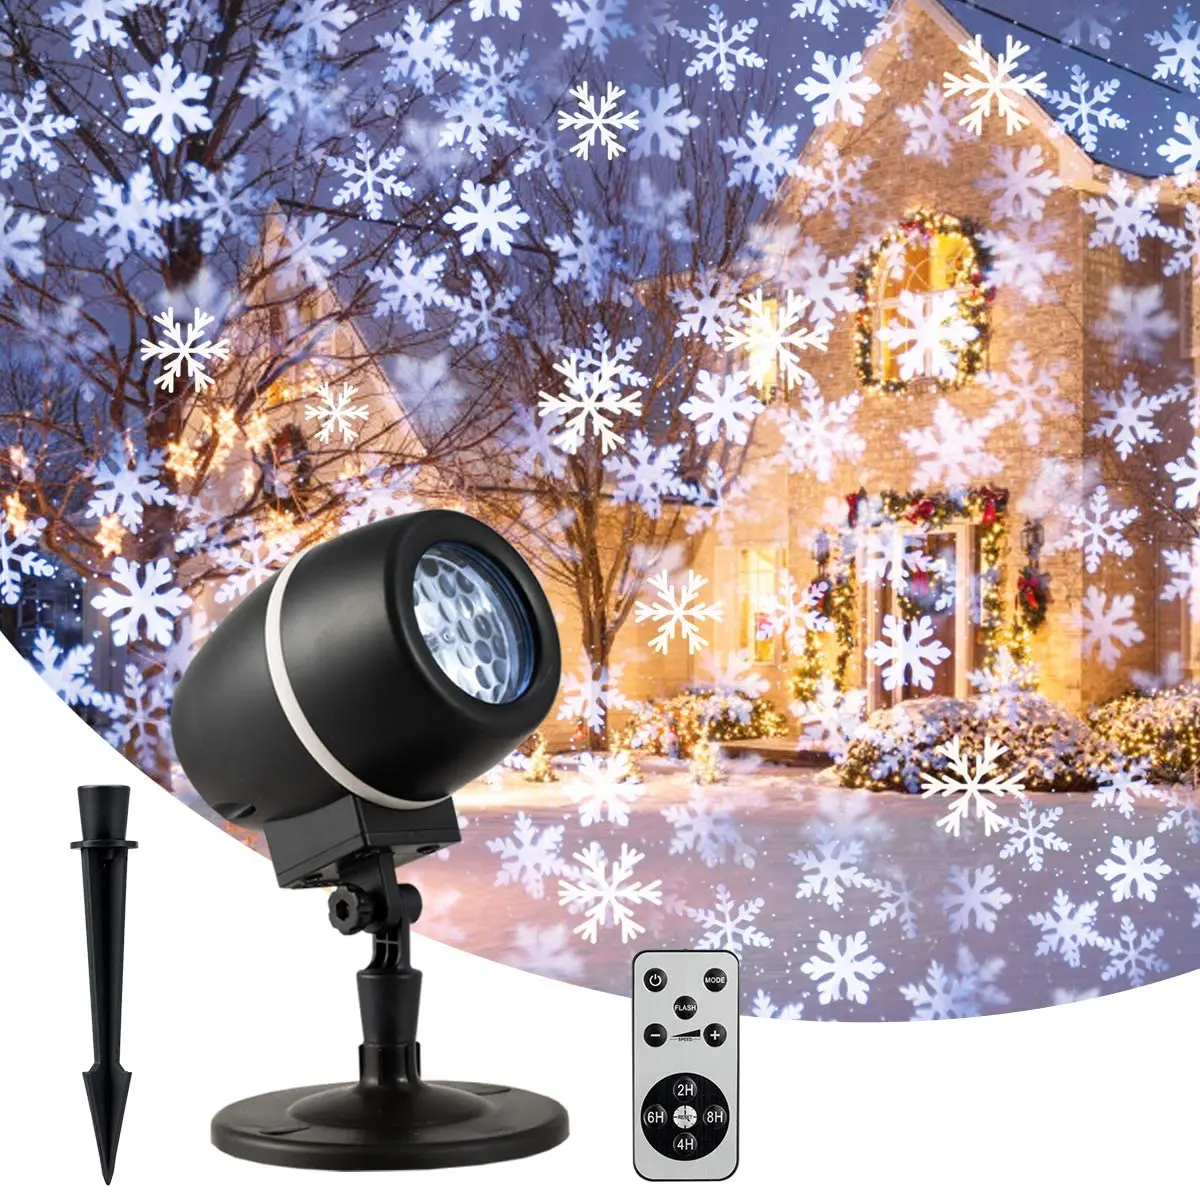 Patterns Waterproof LED Christmas Projection Lamp Decor Stage Xmas Party Light 